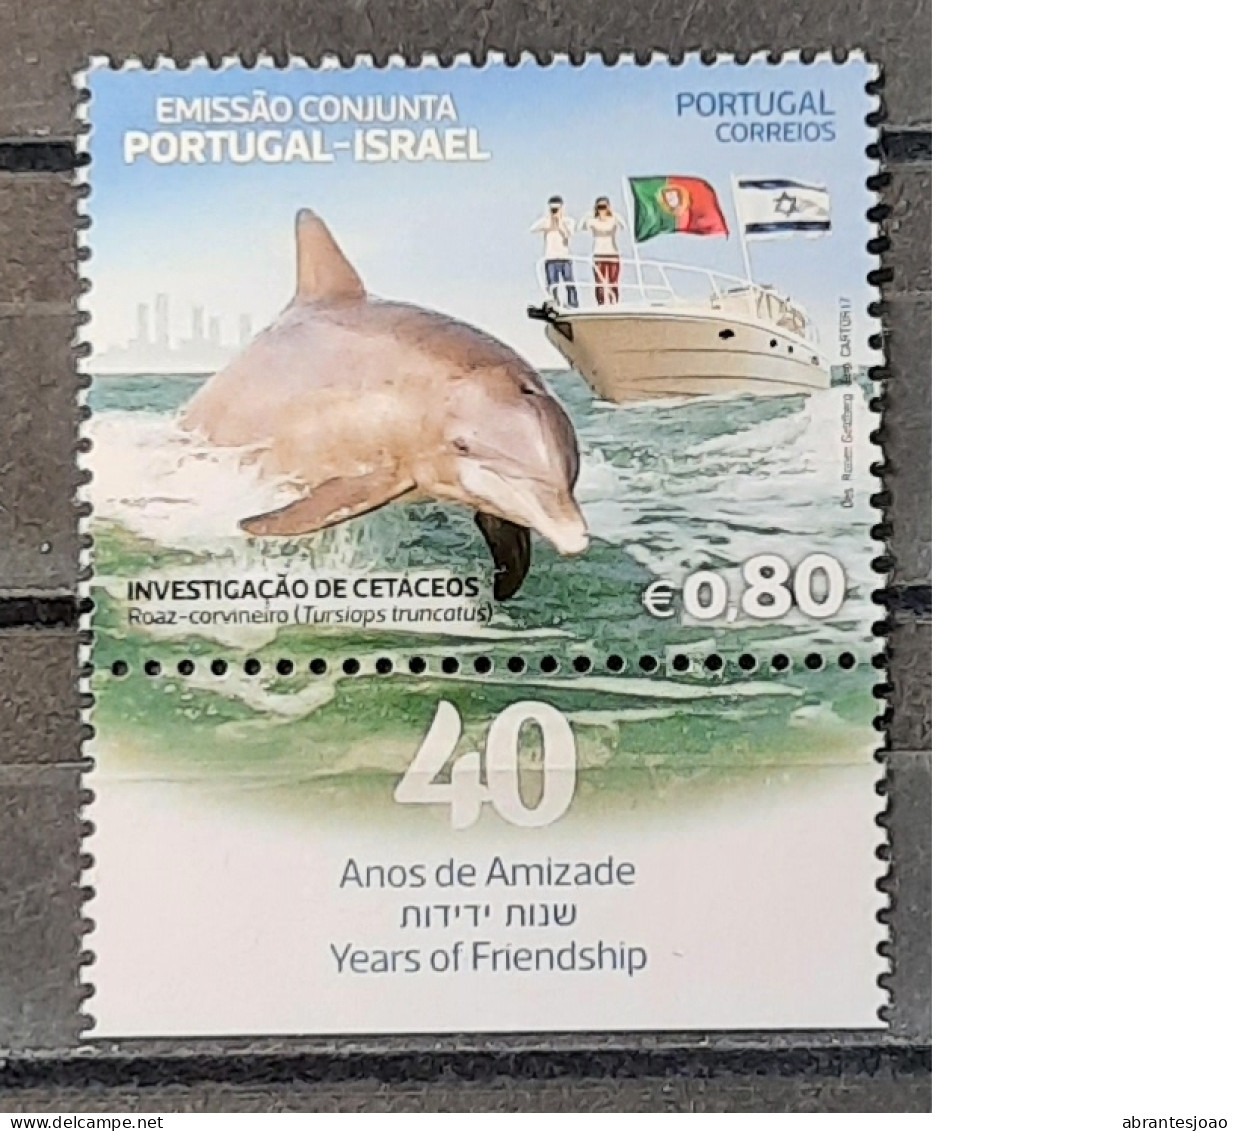 2017 - Portugal - MNH - Joint With Israel -40 Years Of Friendship - Dolphins - 2 Stamps - Ongebruikt